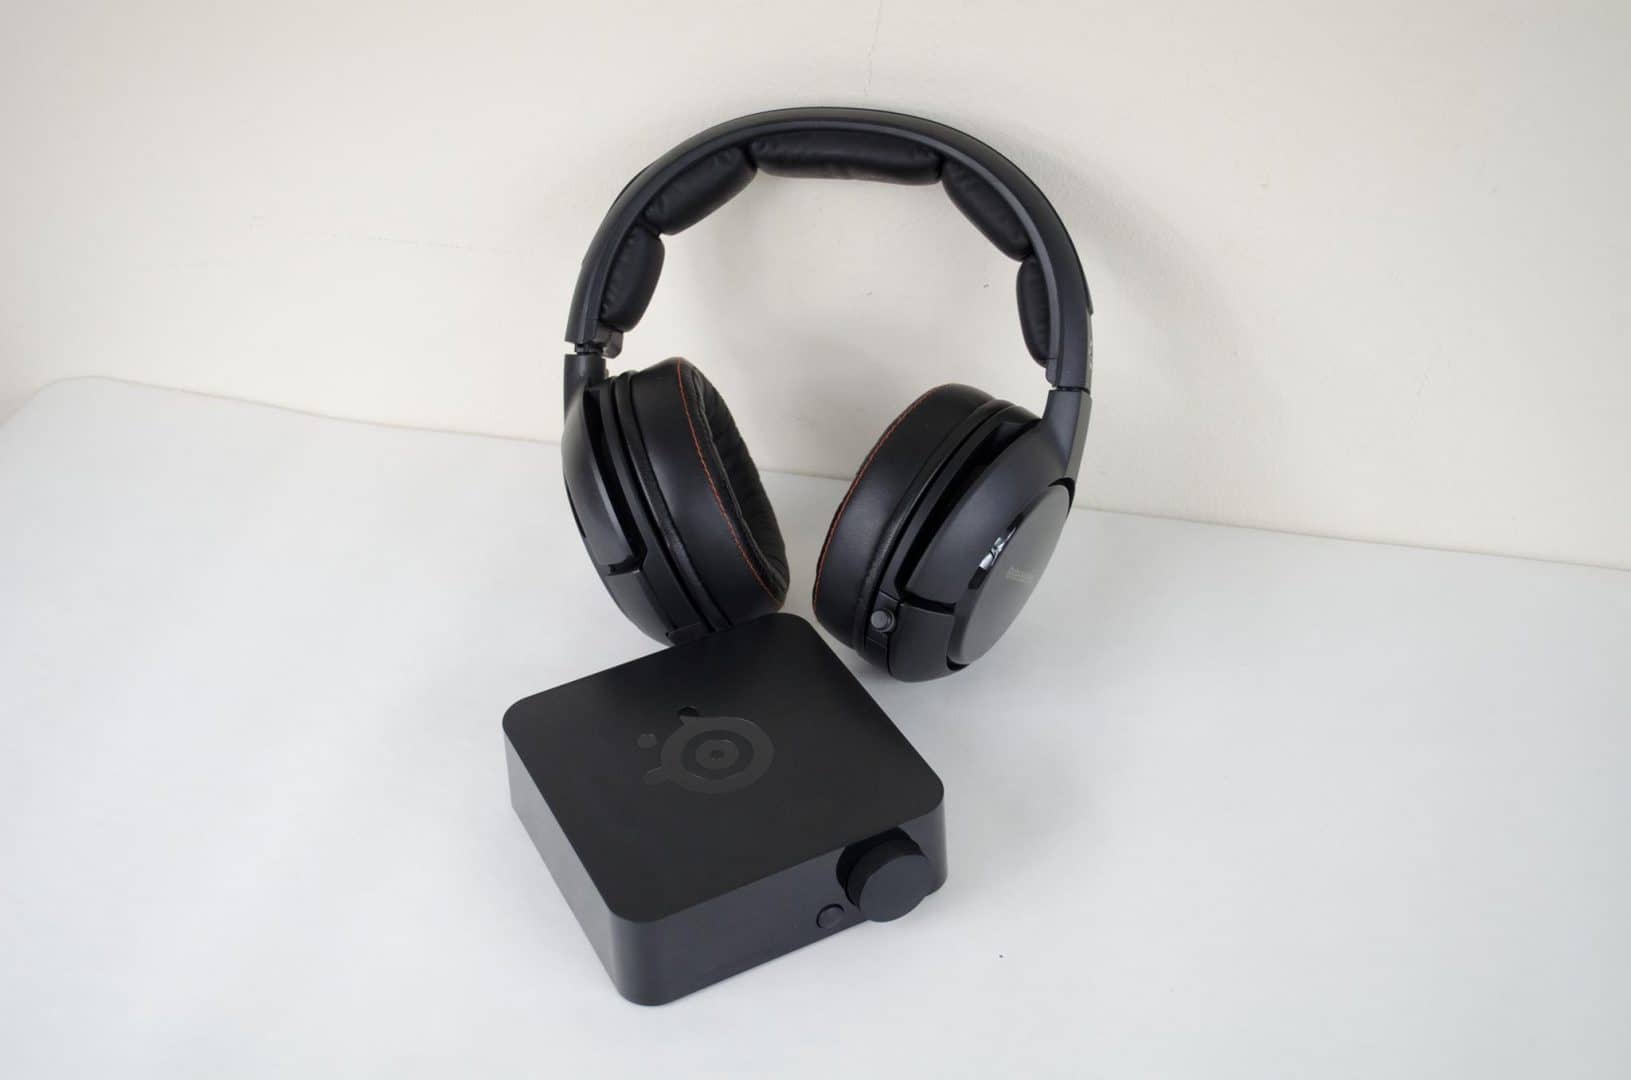 transaction Marine Duty SteelSeries Siberia 800 Wireless Gaming Headset Review - EnosTech.com